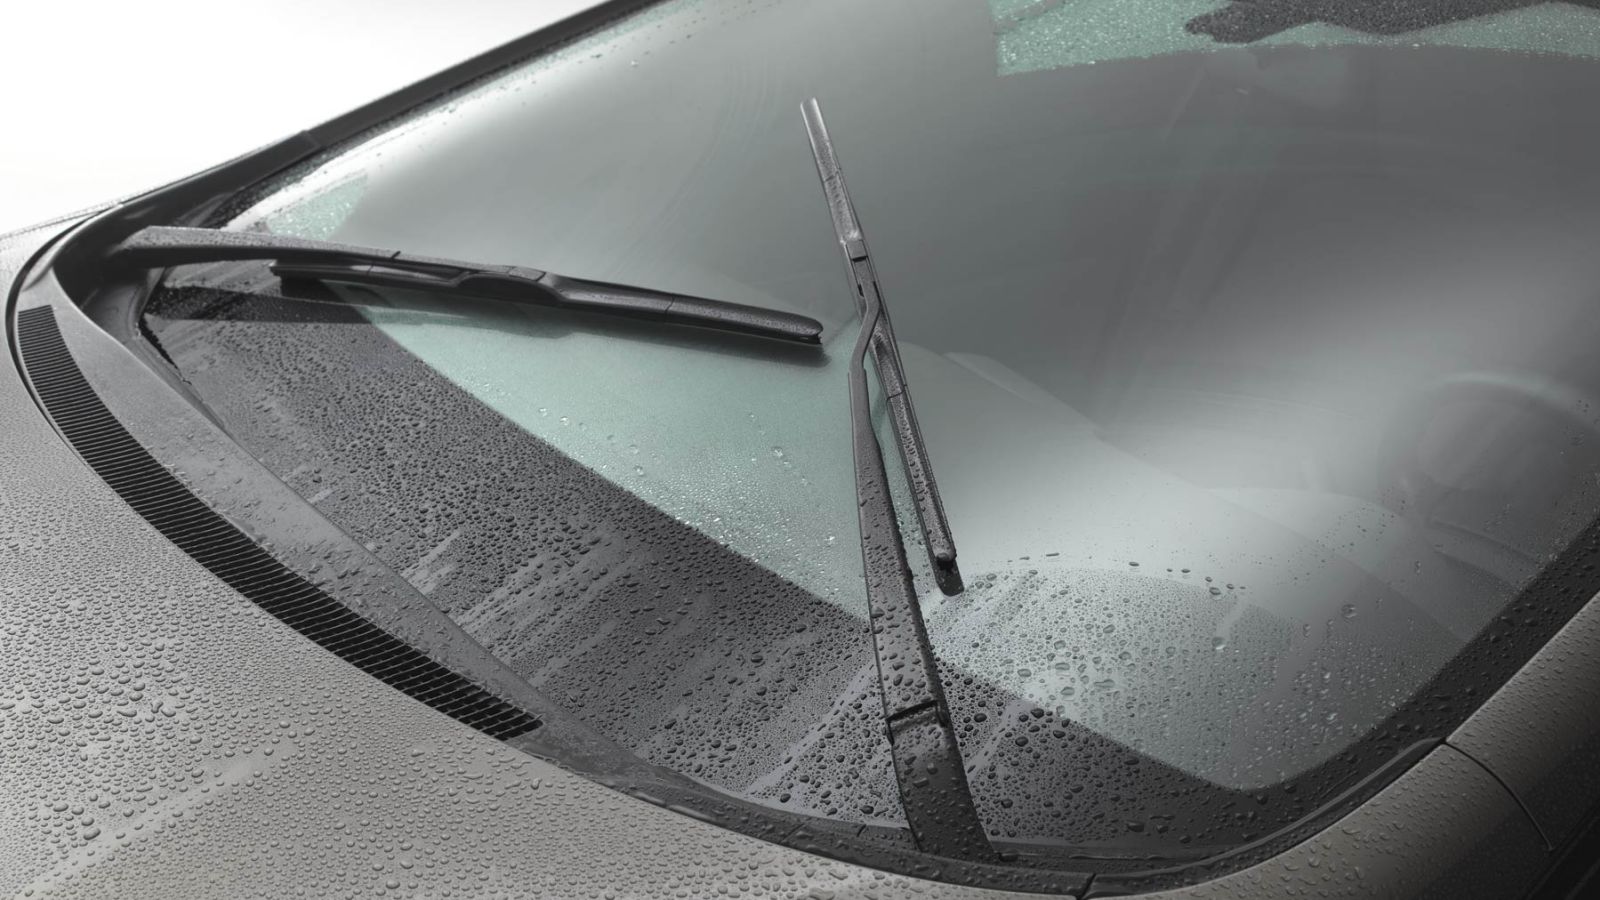 Maintenance of car wipers